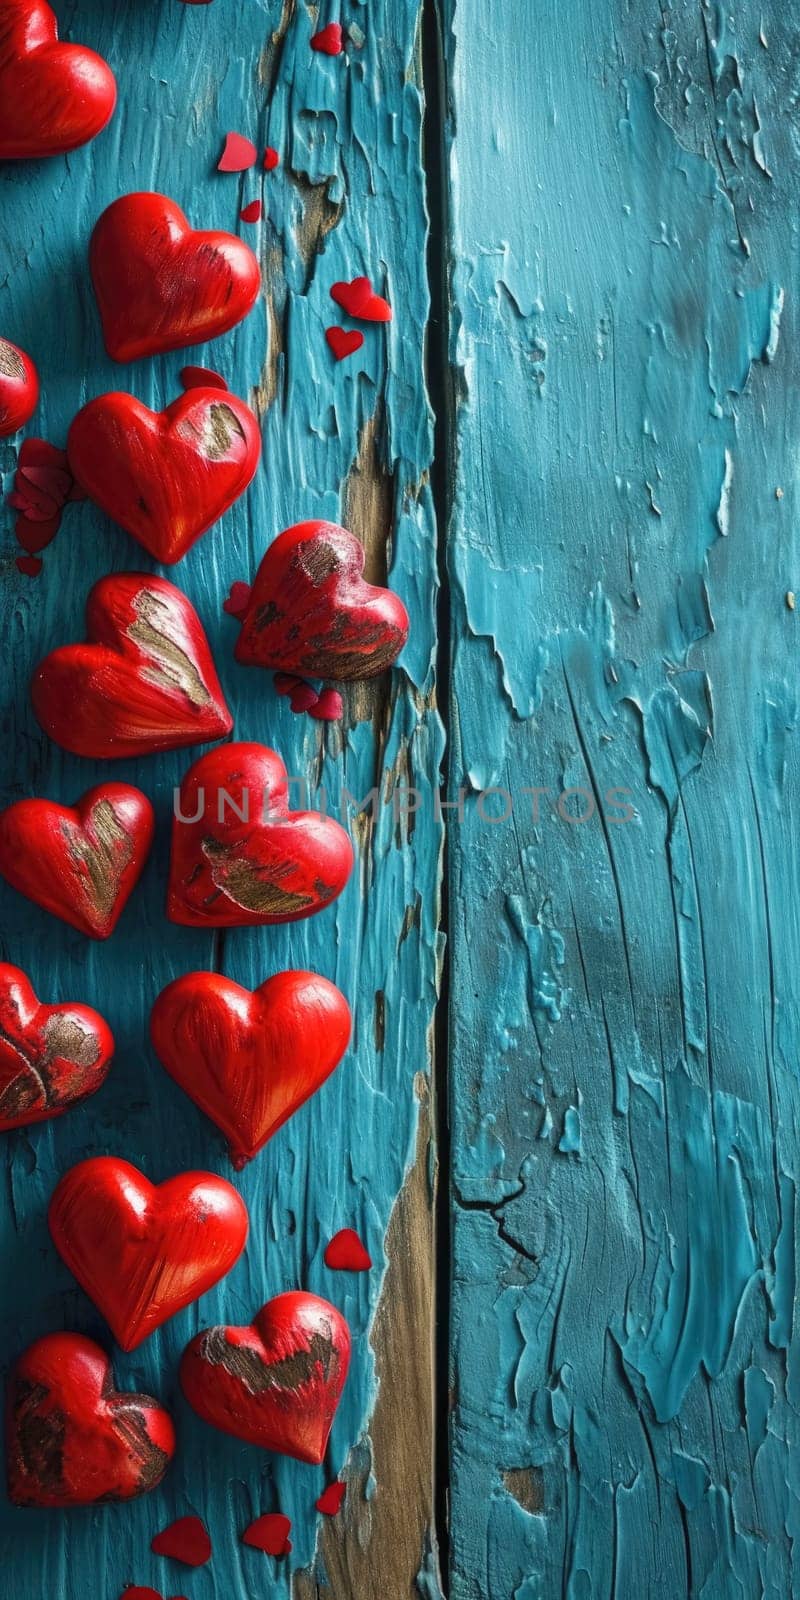 Red hearts on blue wooden background. Valentine's Day backdrop. Vertical banner, voucher or greeting card for smartphone